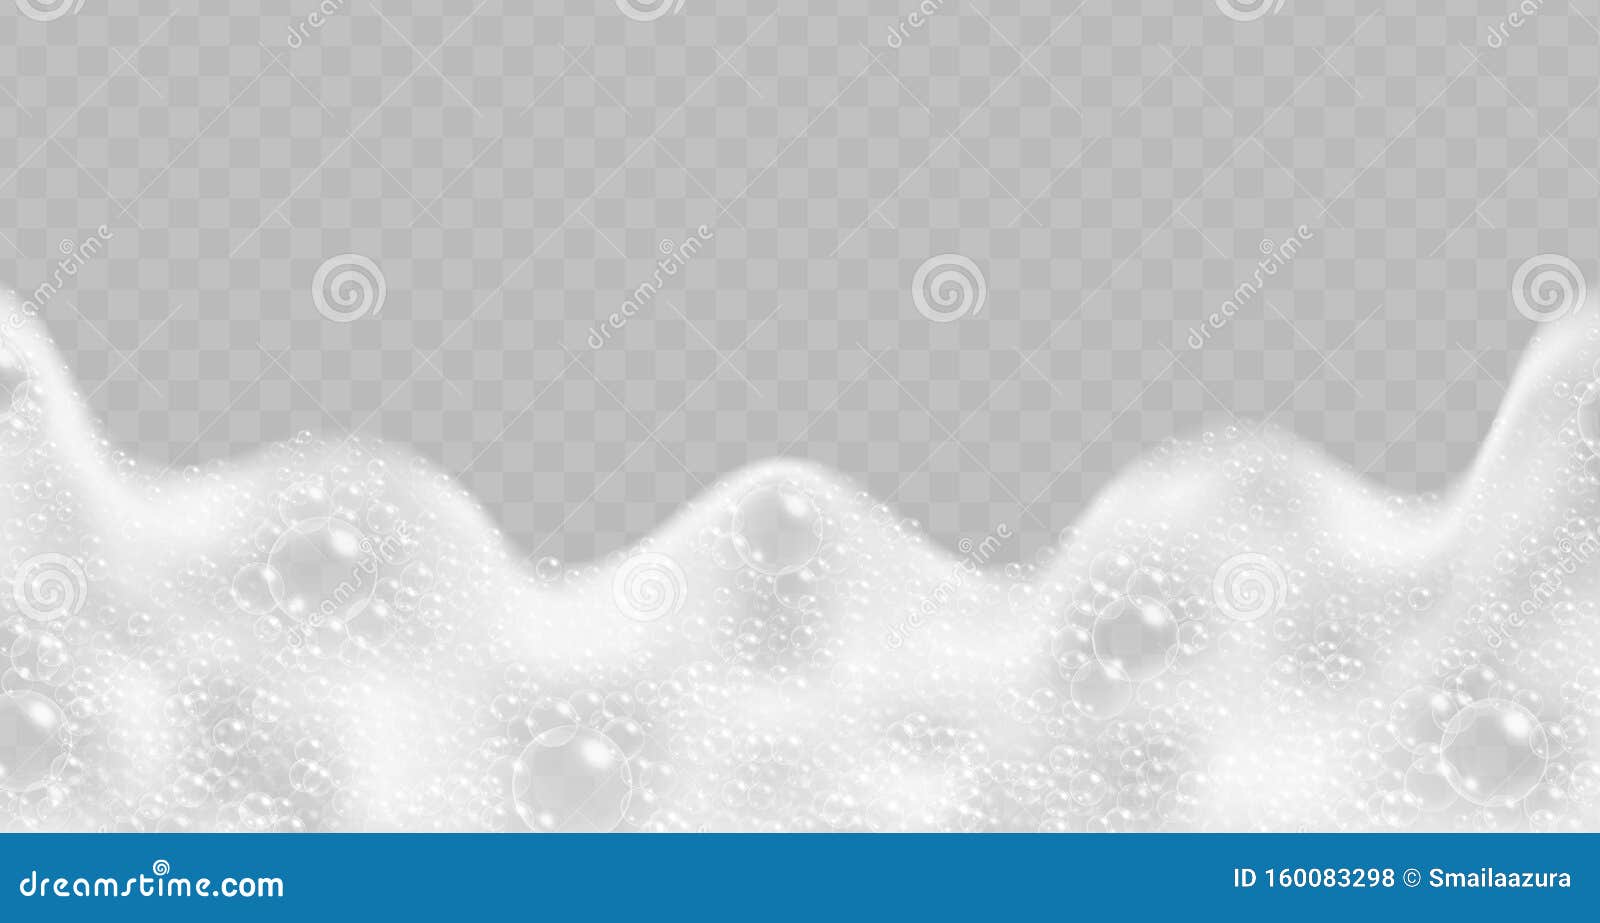 soap foam with bubbles top view  on transparent background.